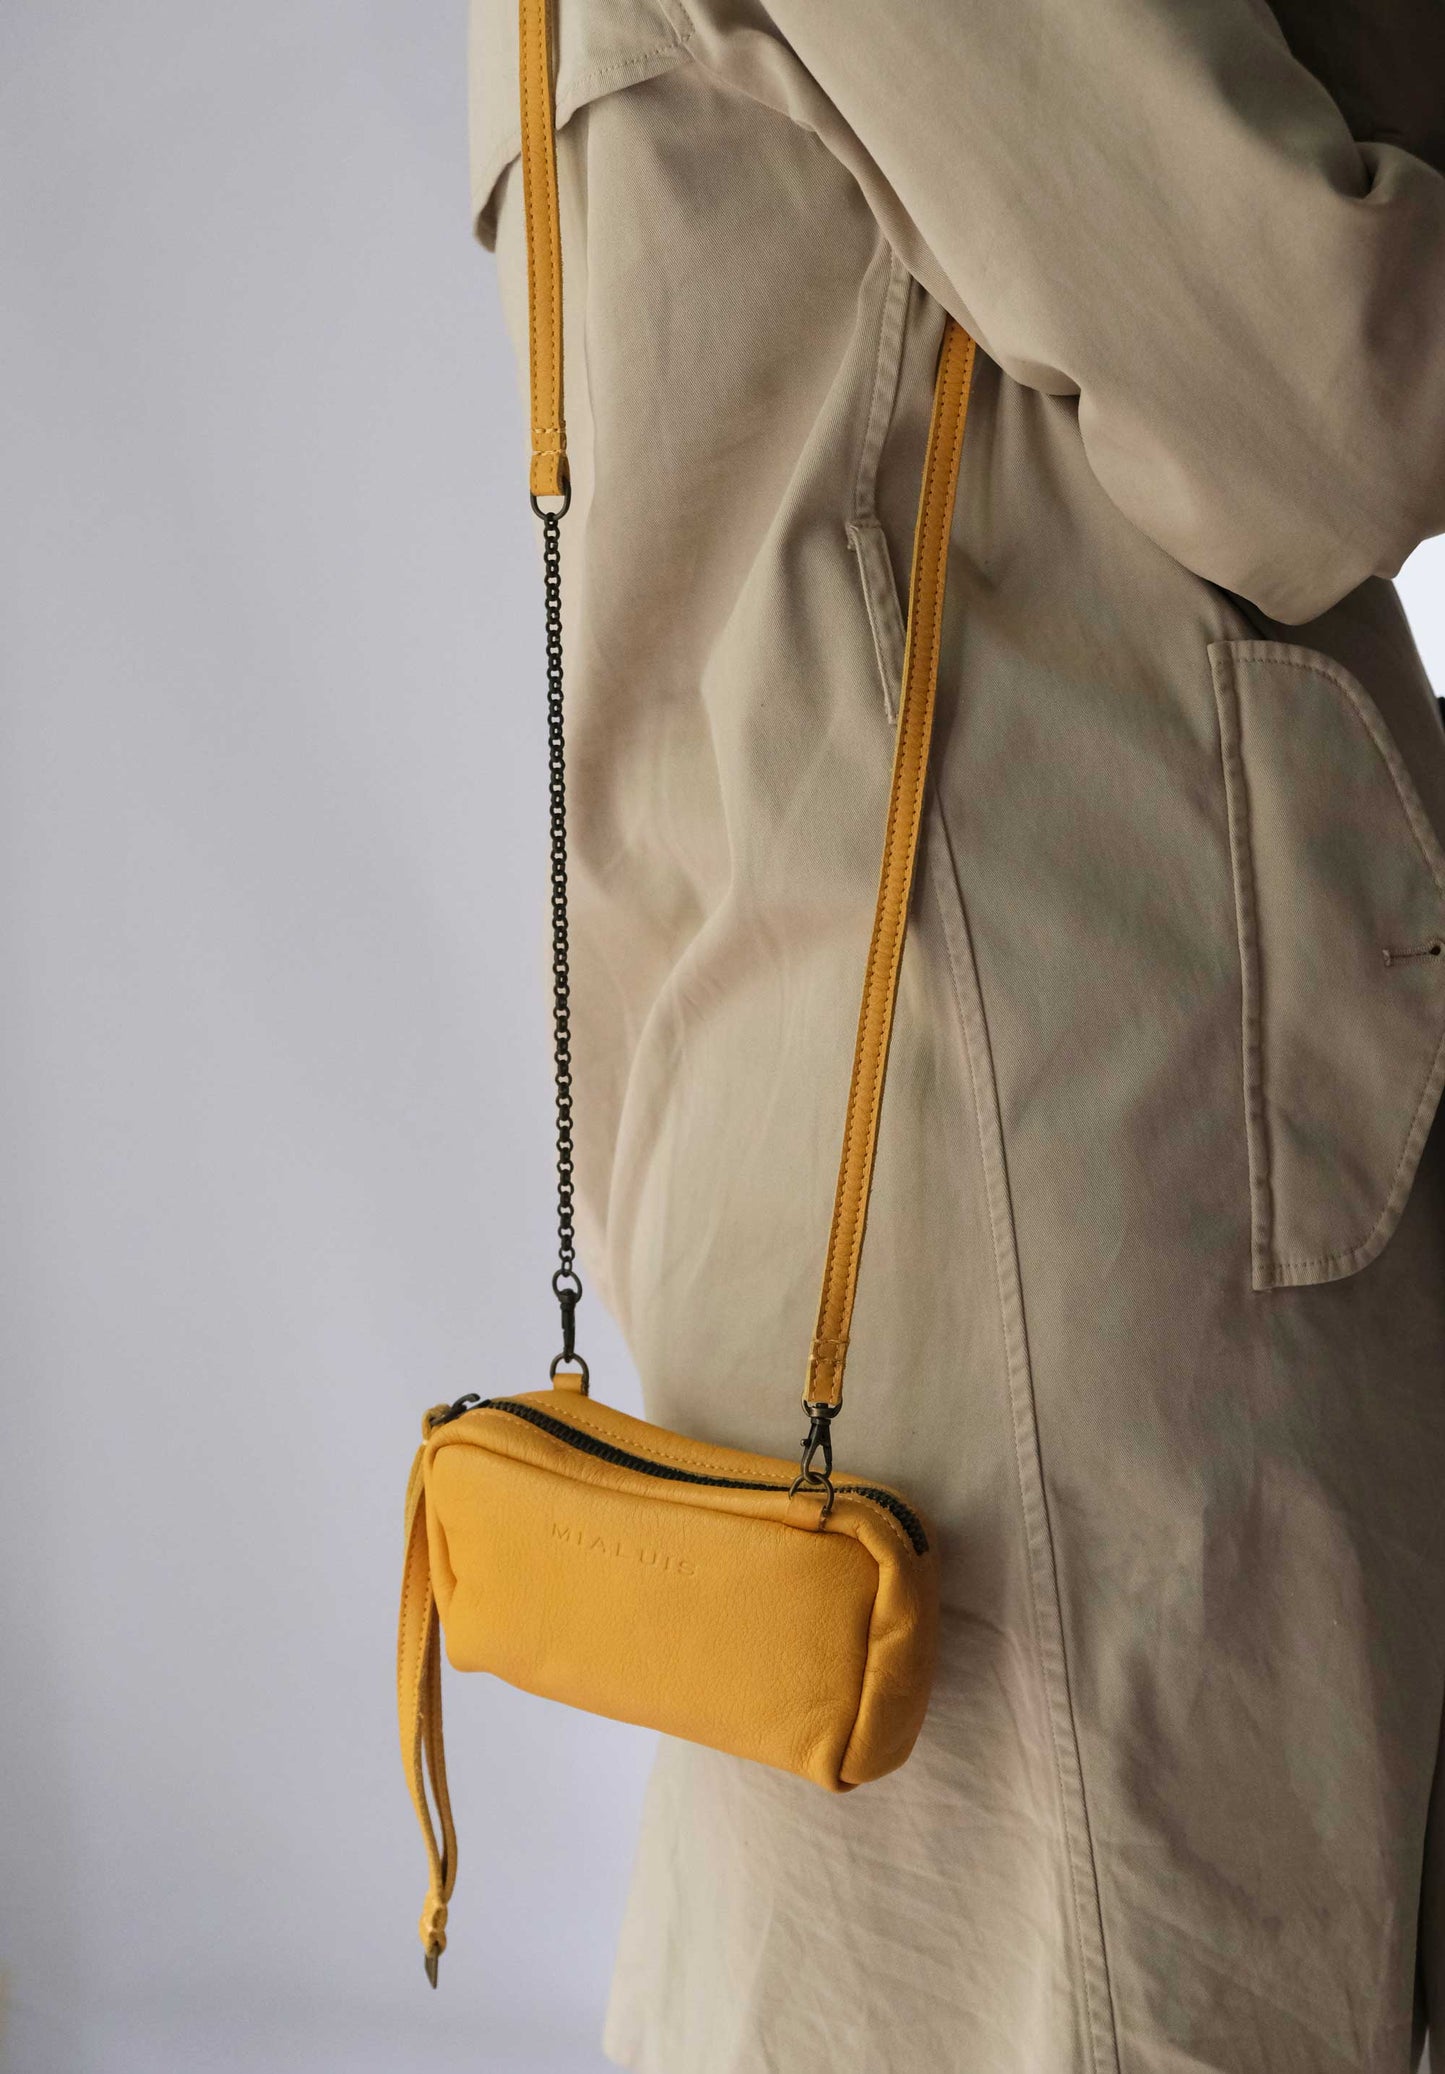 Bombo pochette in yellow soft leather